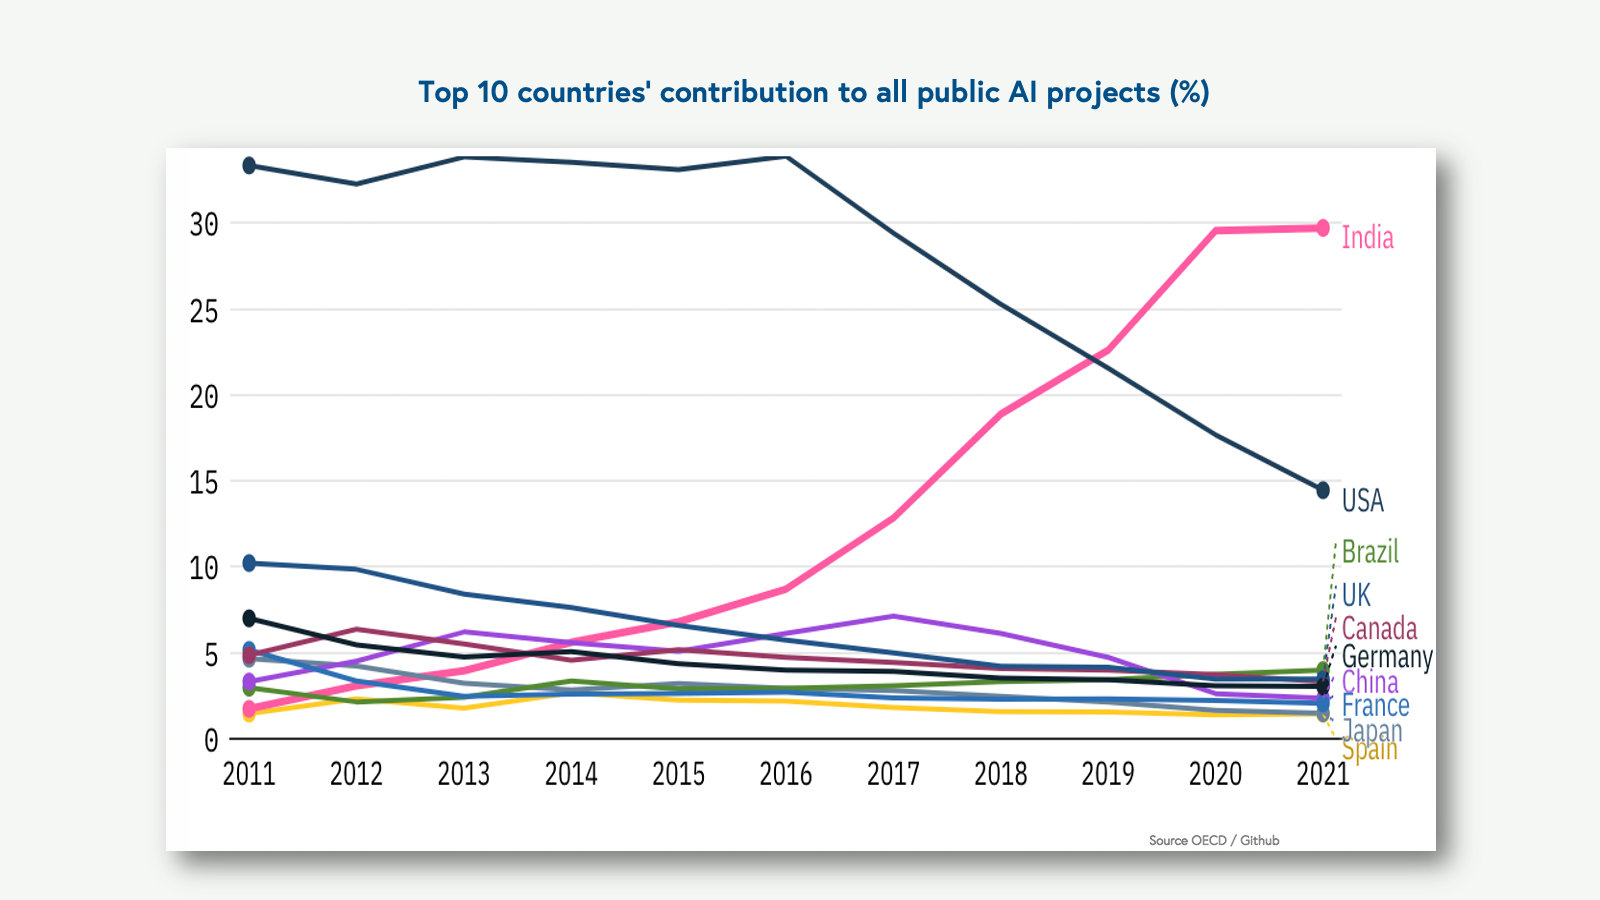 Top 10 countries’ contribution to all public AI projects (%)